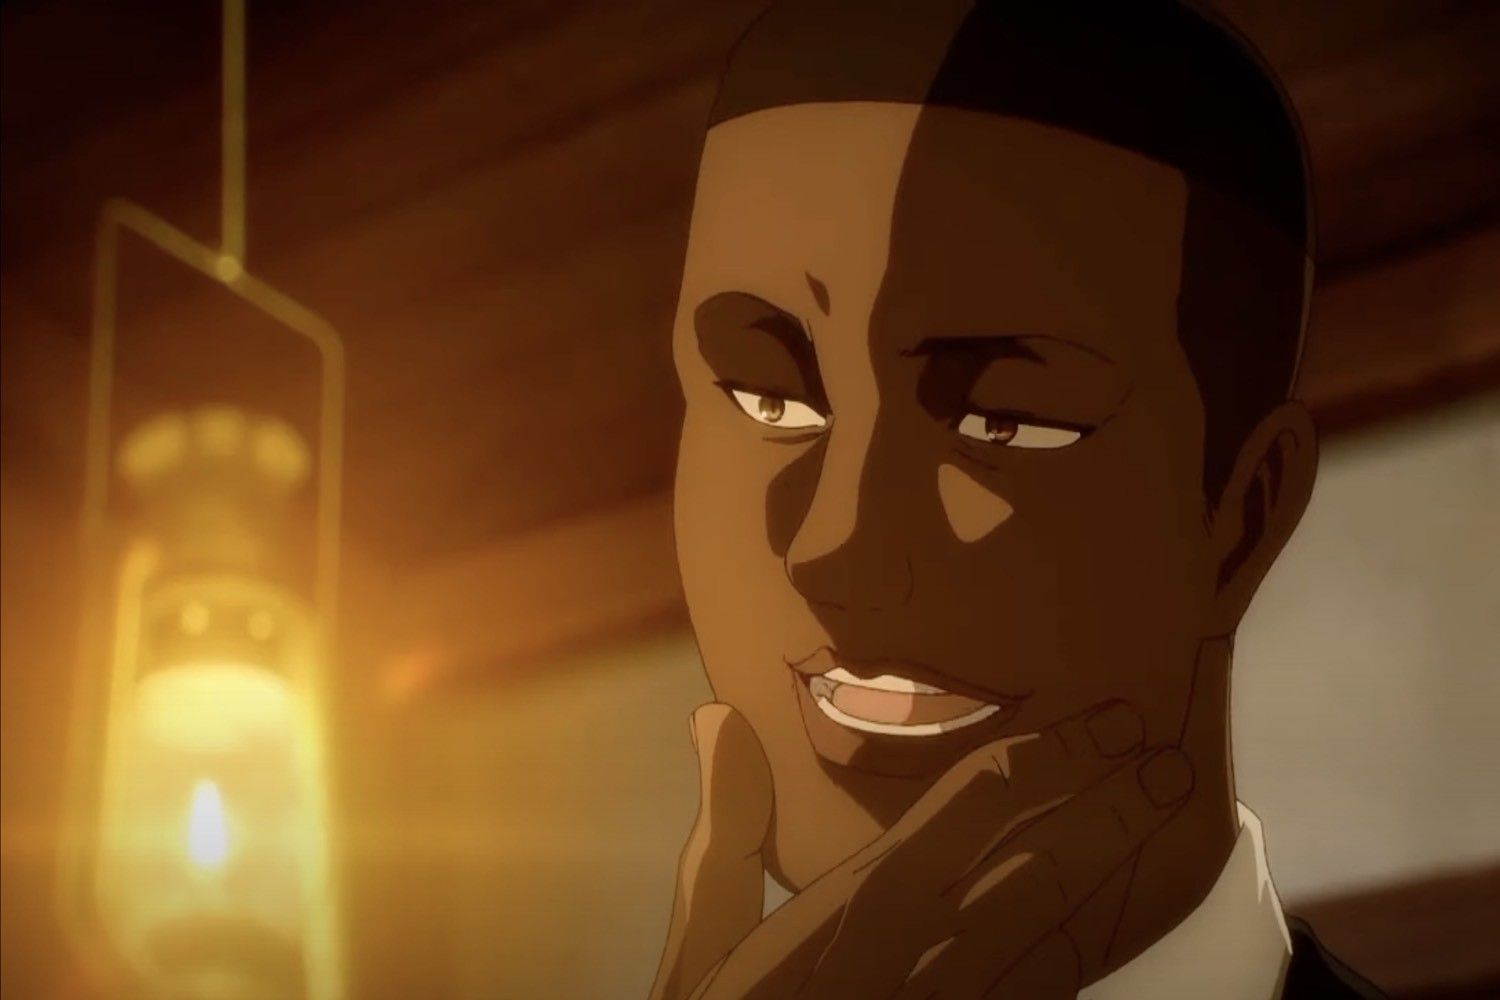 30 best black anime characters that you need to know about - Tuko.co.ke